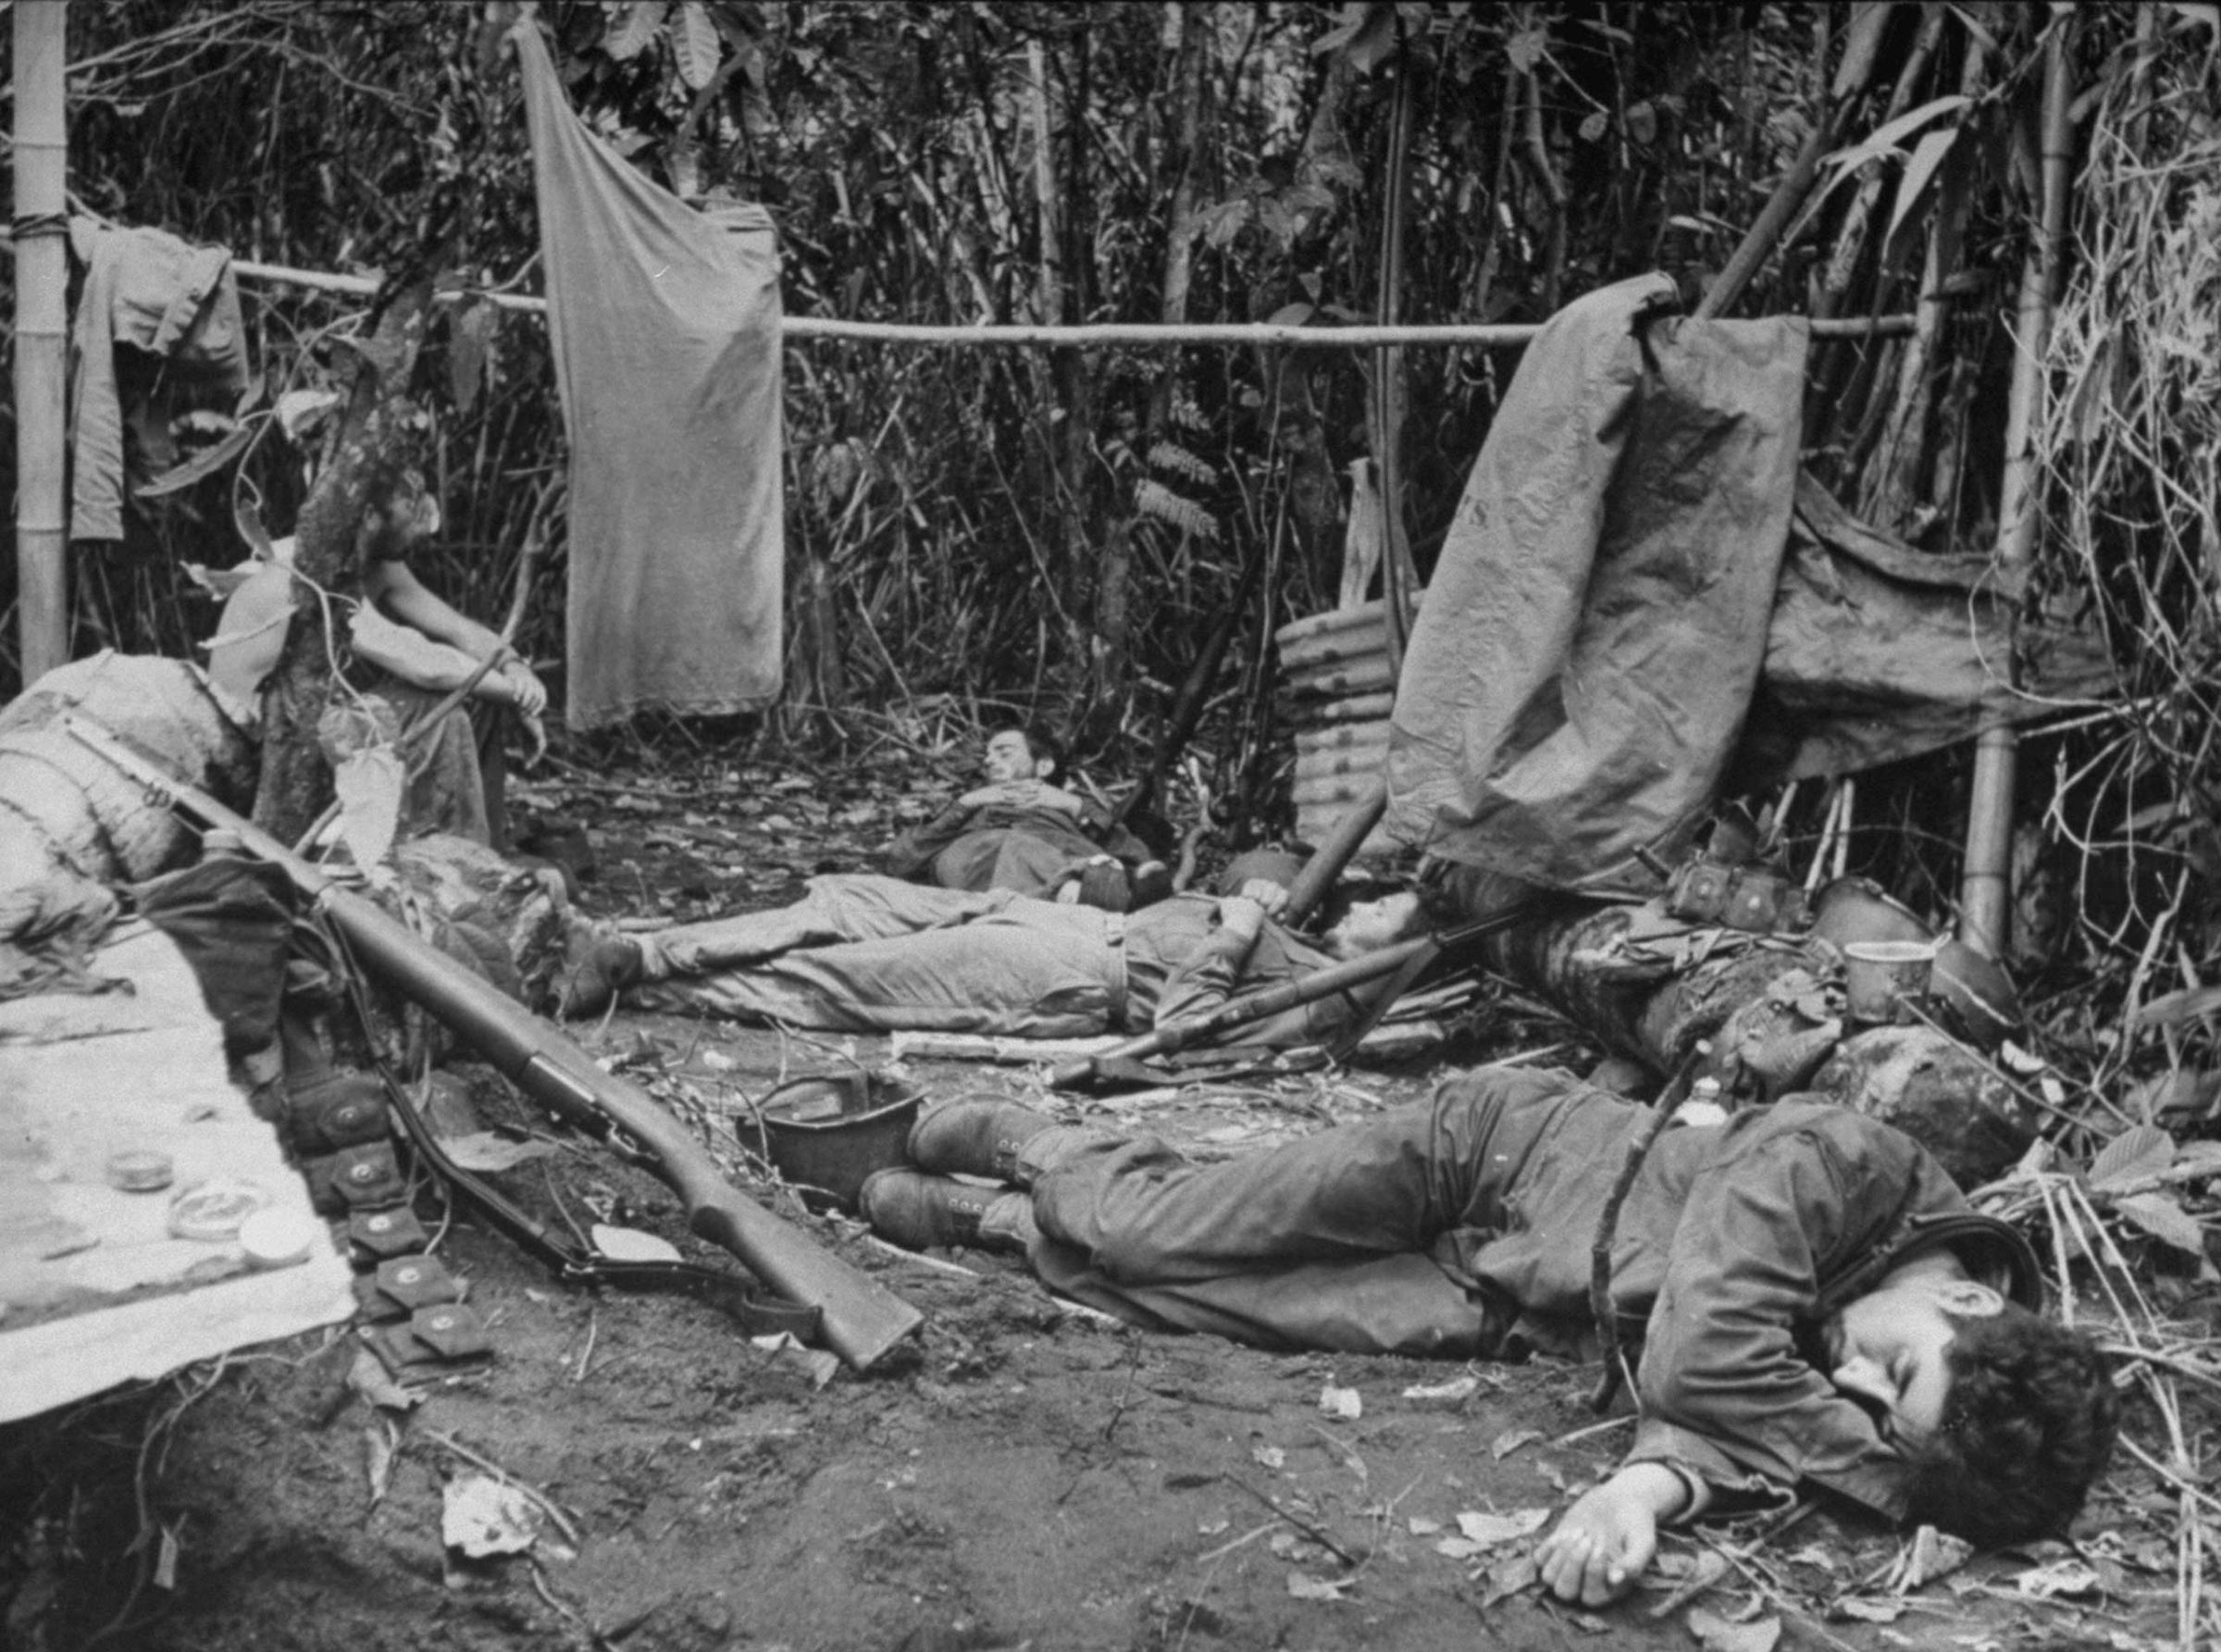 "A few hundred yards behind the lines U.S. soldiers flop in exhaustion, trying to sleep and dry their clothes as best they can."